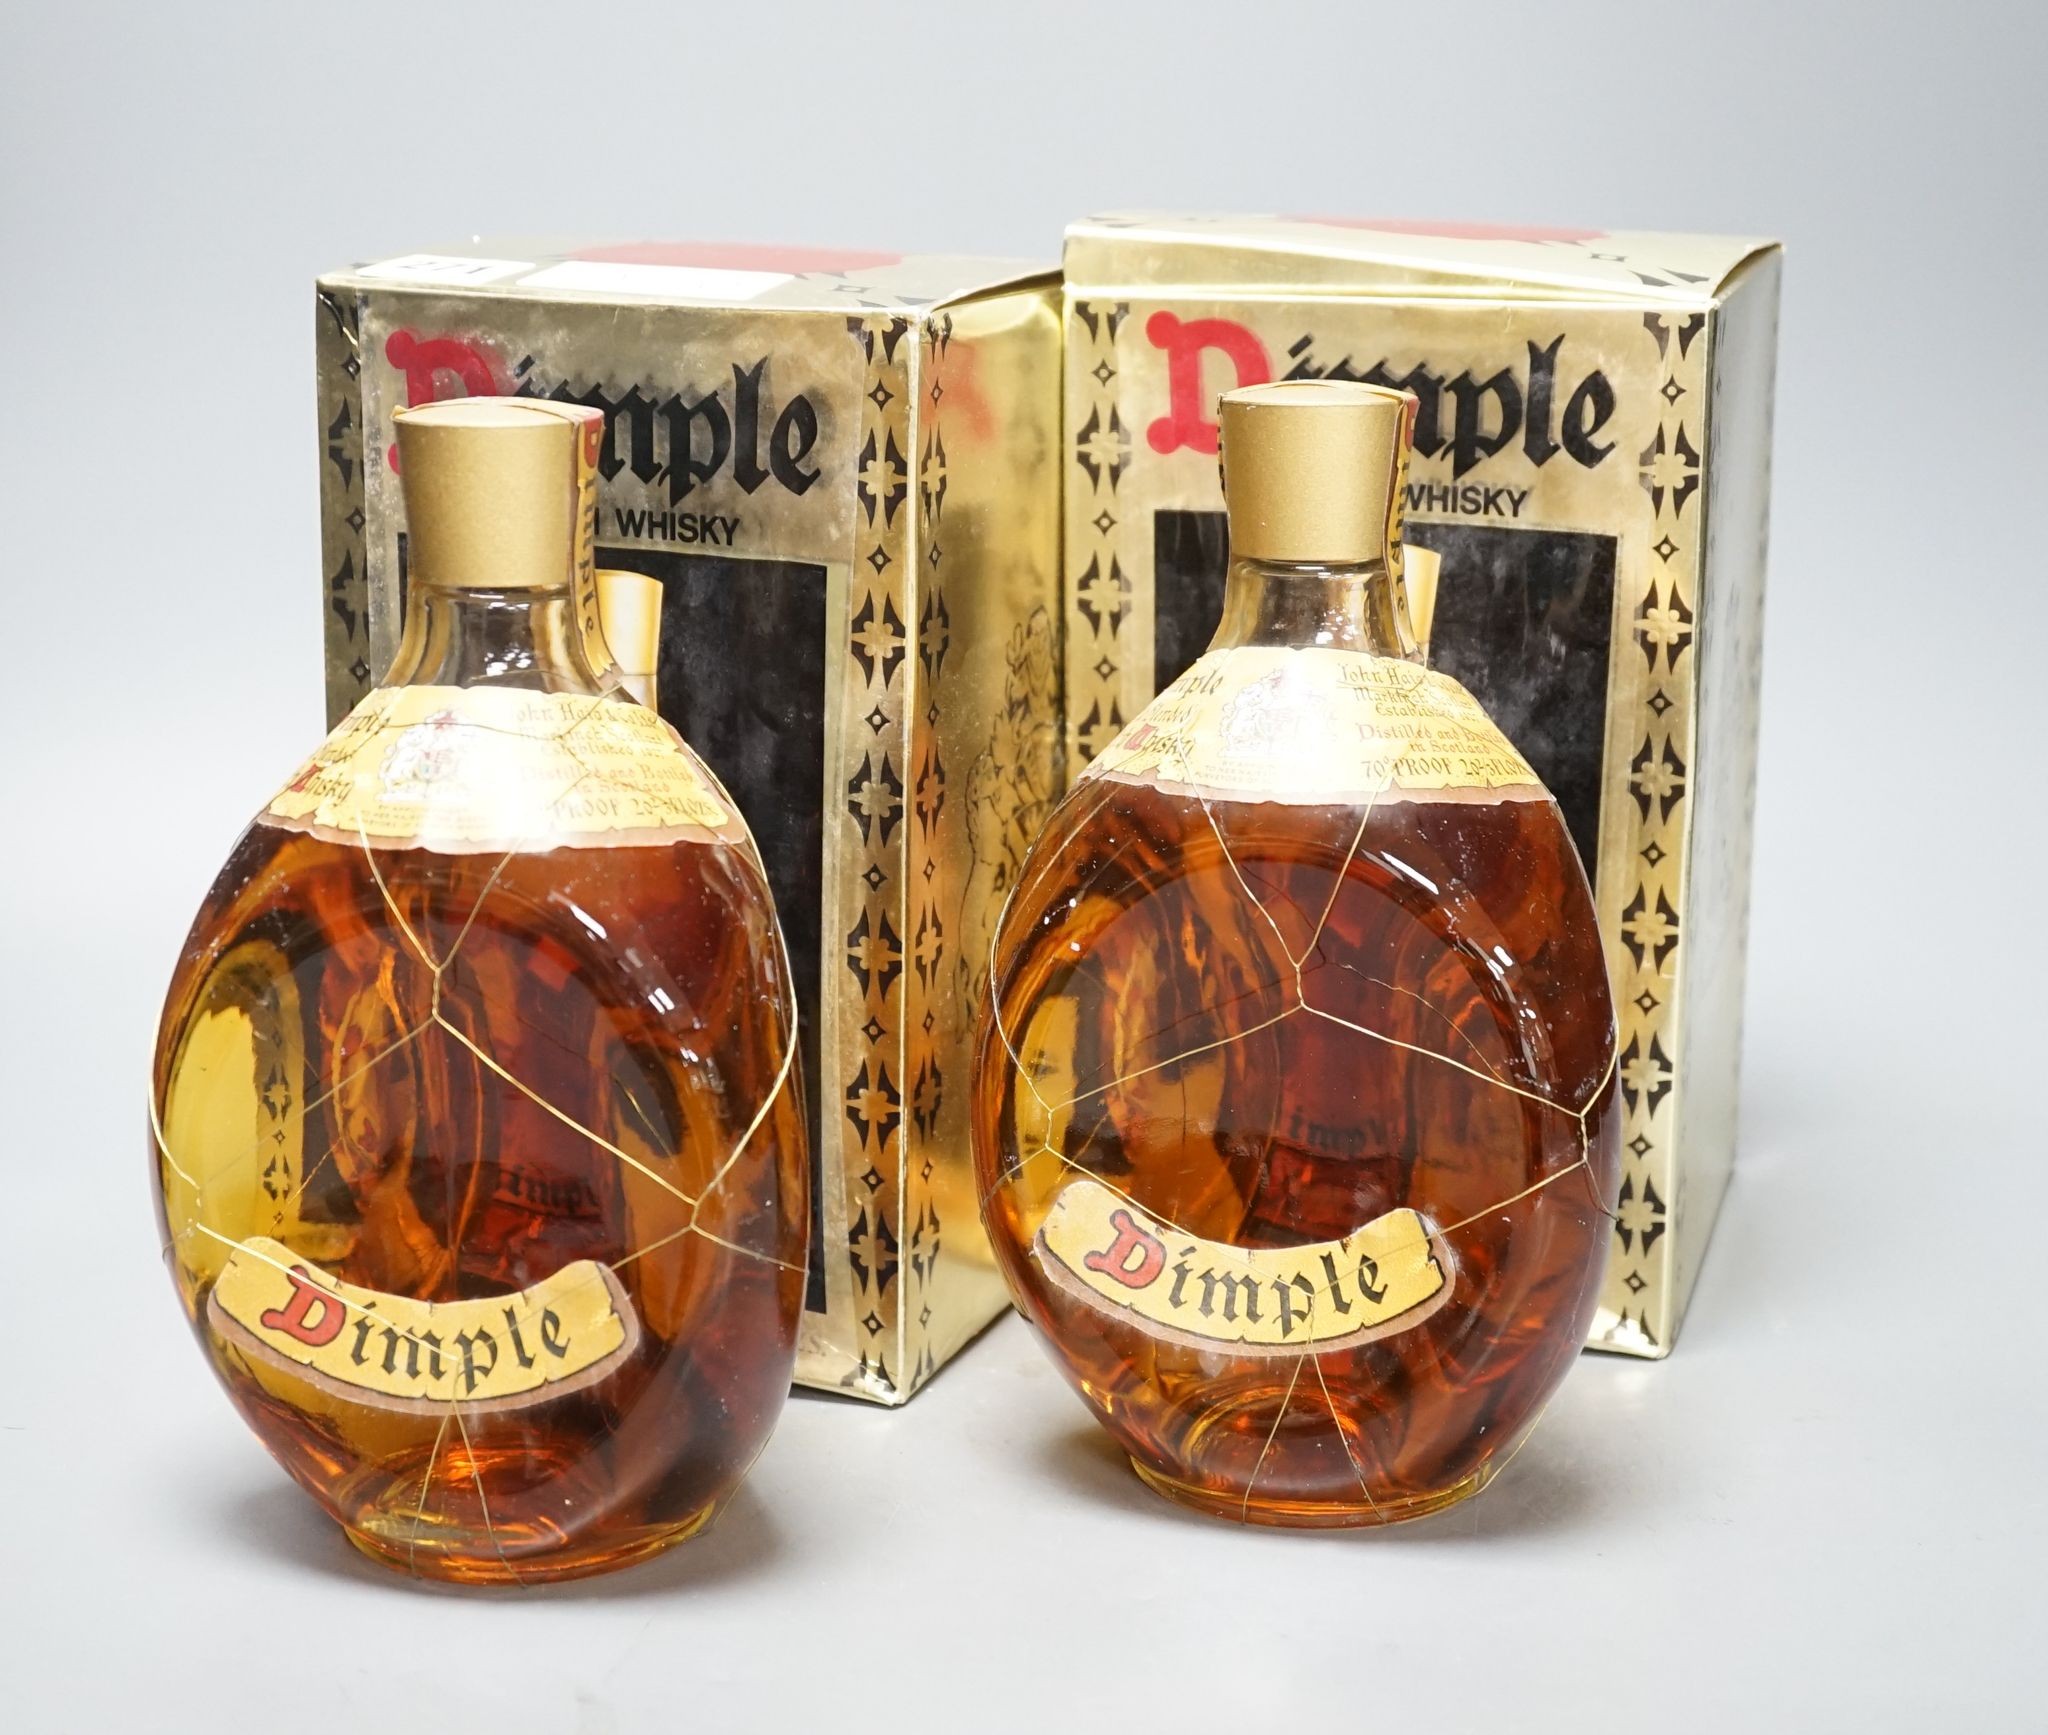 Two boxed bottles of Dimple Scotch whisky.